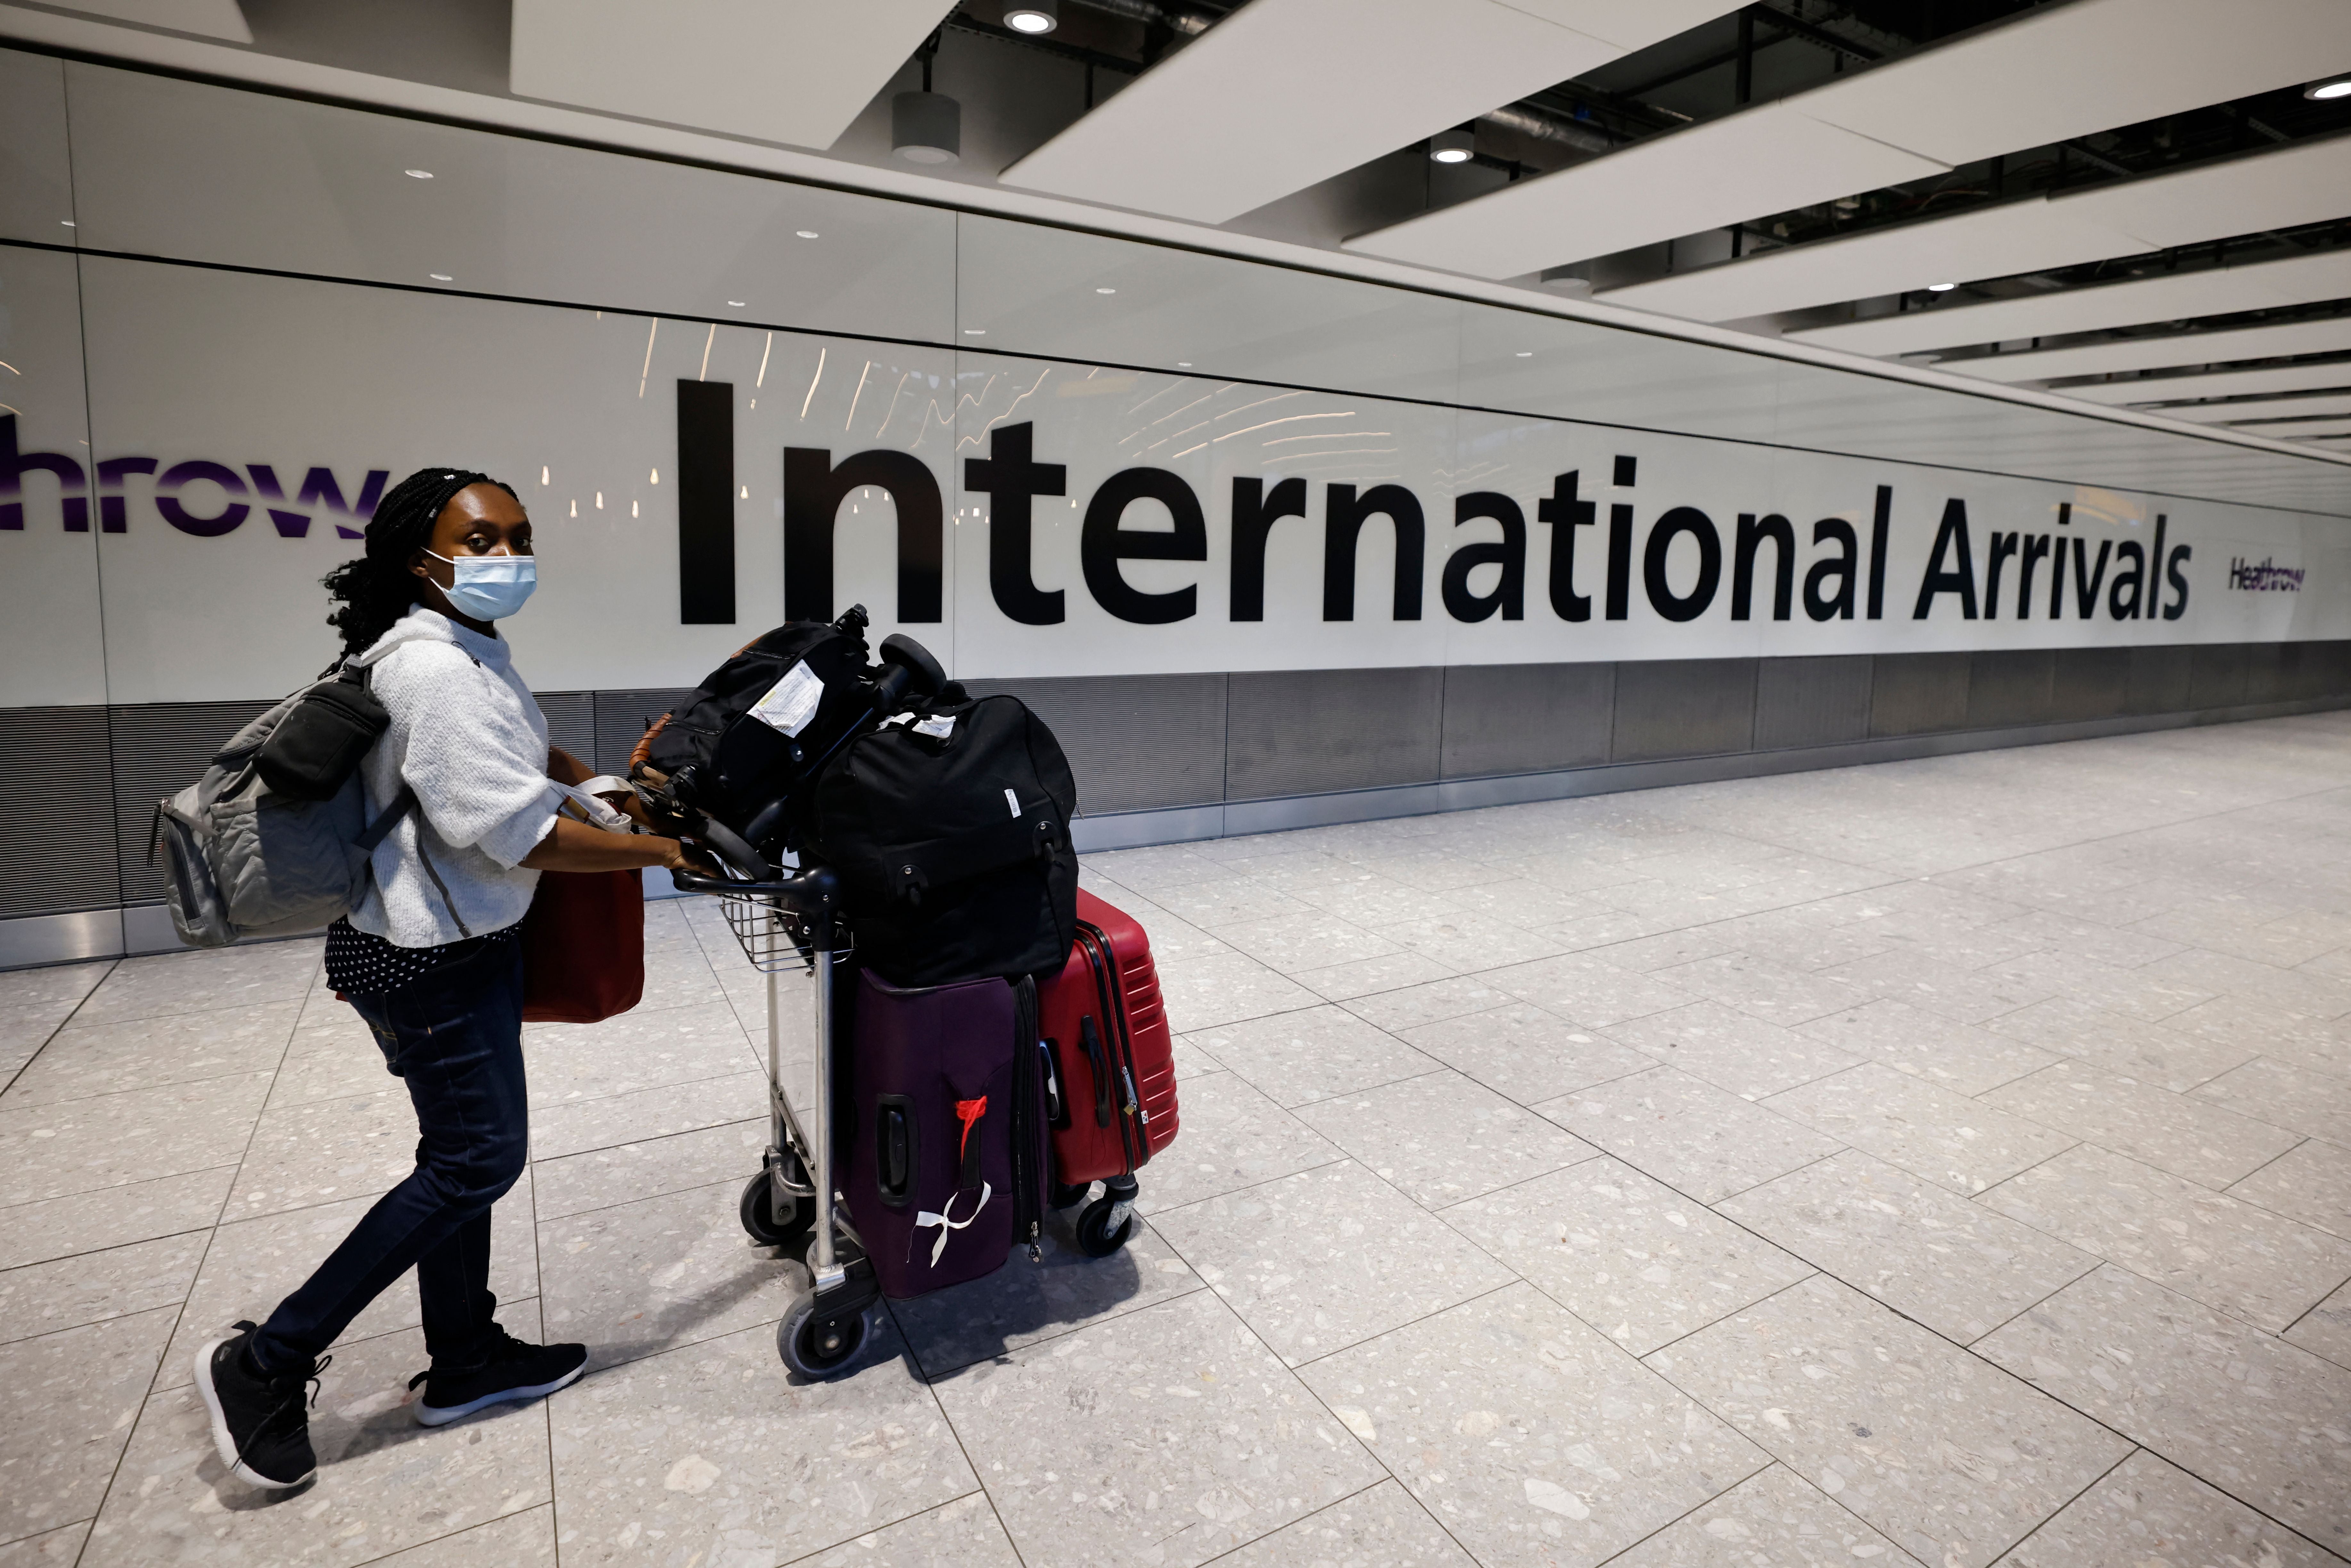 People fully vaccinated in the United States and European Union, including France will now be allowed to travel to England without having to quarantine on arrival.